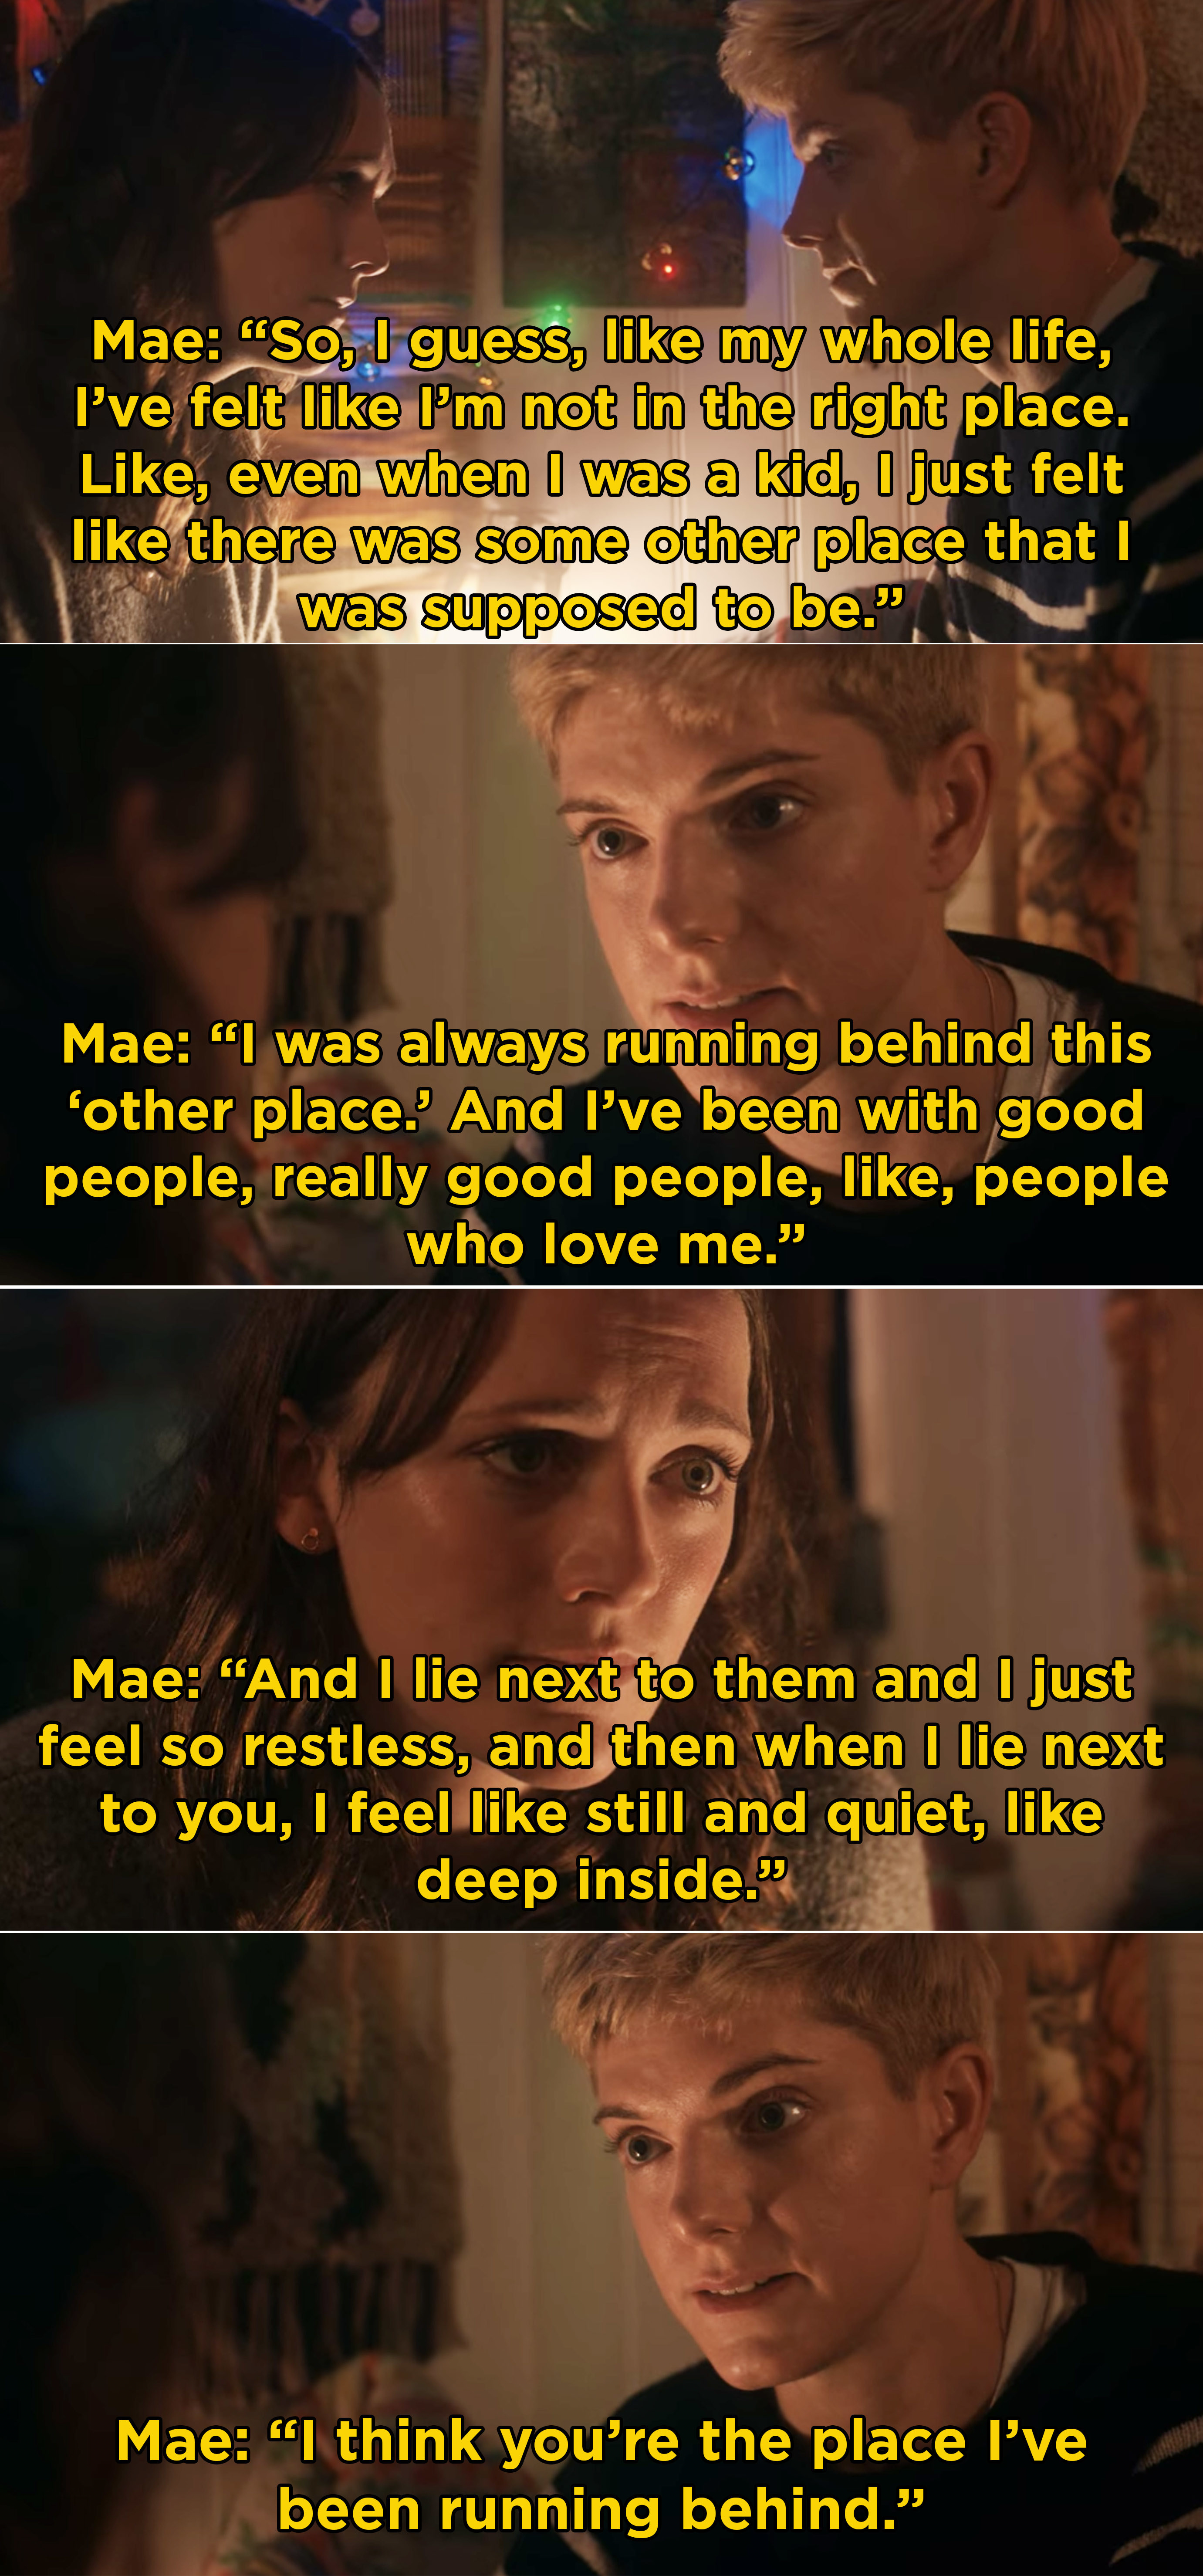 Mae telling George that all her life she felt like she&#x27;s been running, but George makes her feel &quot;still&quot;